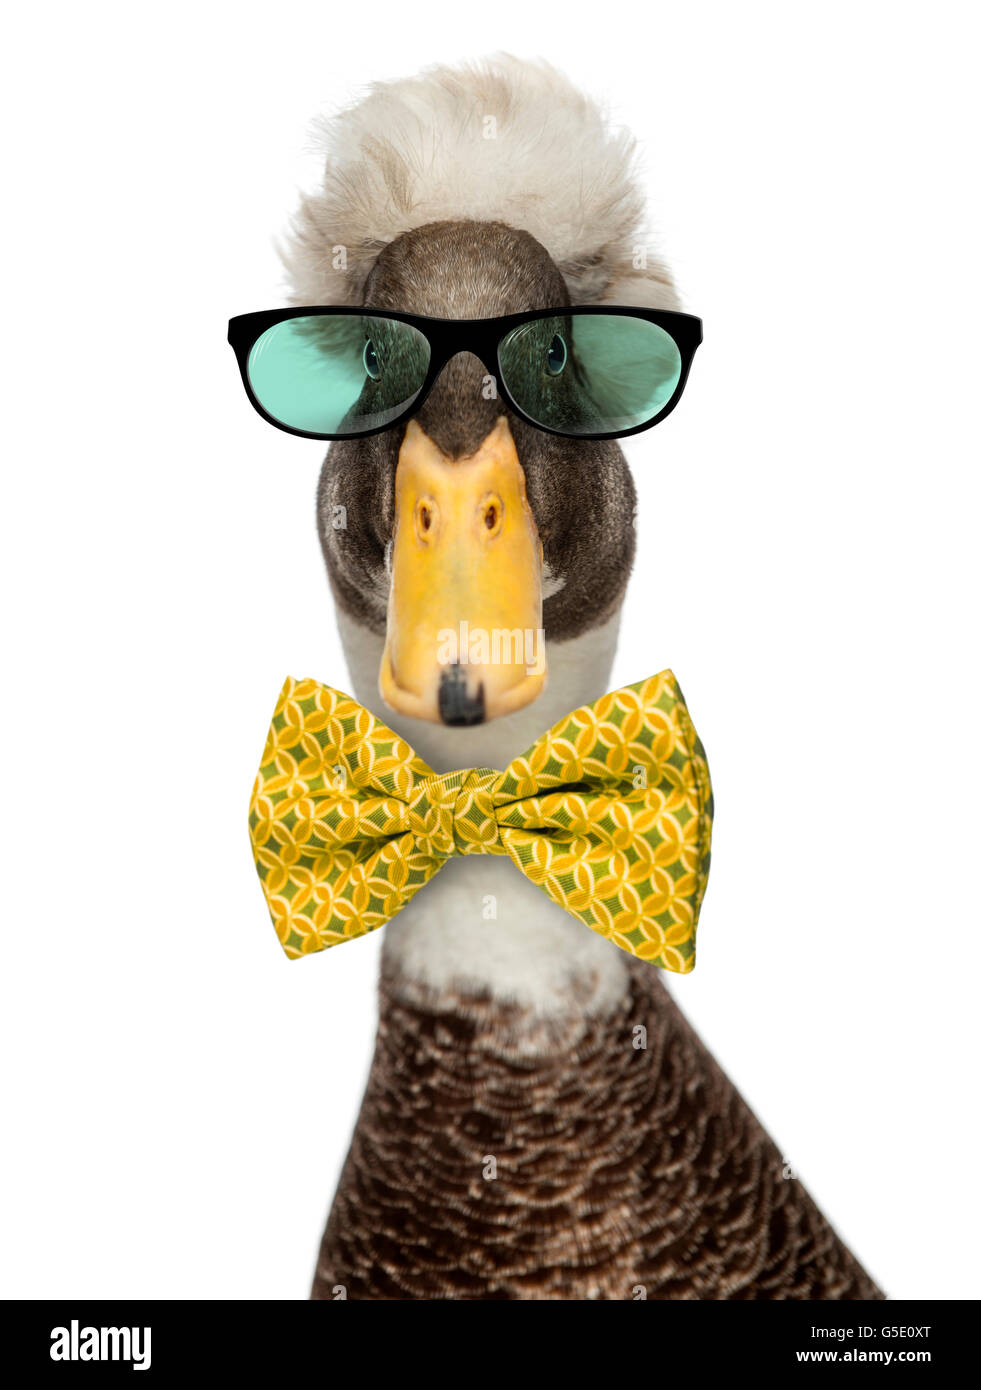 Close-up of a Male Crested Ducks wearing glasses and a bow tie isolated on white Stock Photo